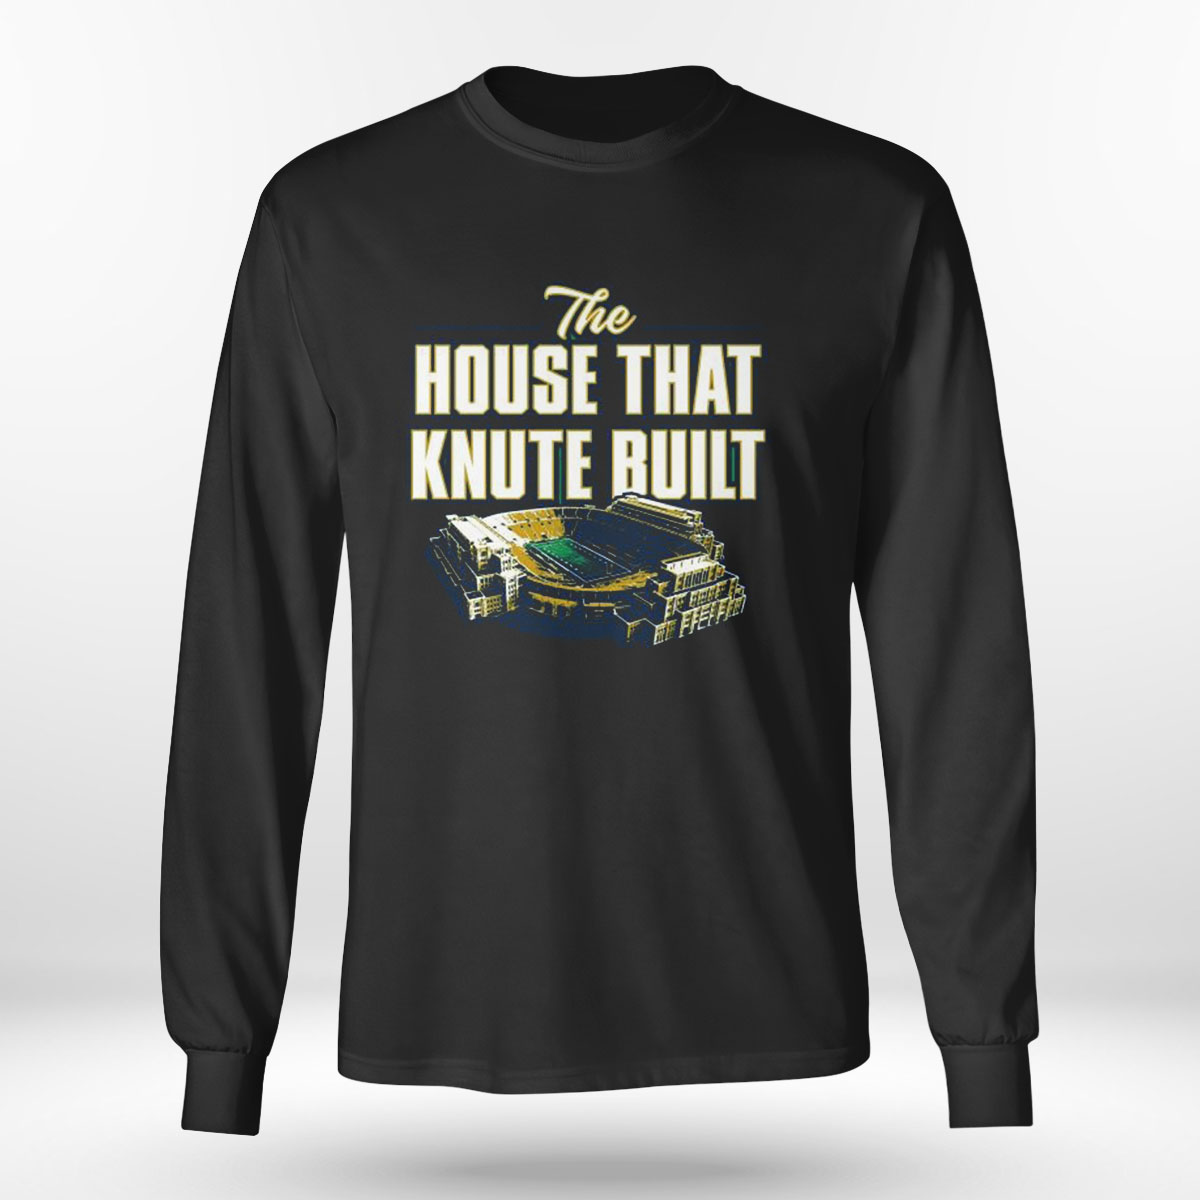 Notre Dame Fighting Irish The House That Knute Built T-shirt